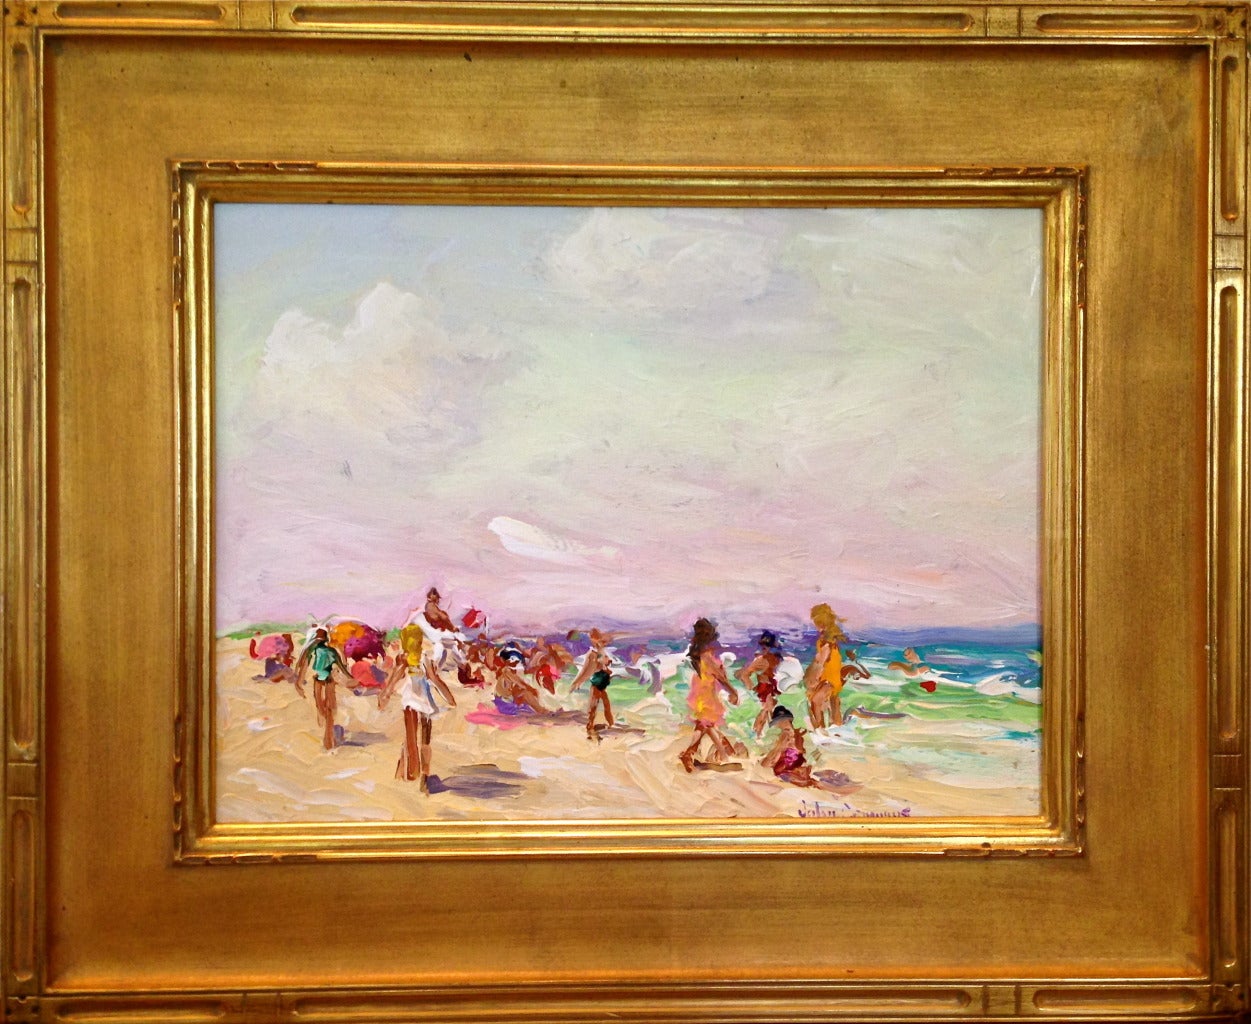 John Crimmins Landscape Painting - Sunny Afternoon at Coopers Beach Southampton New York